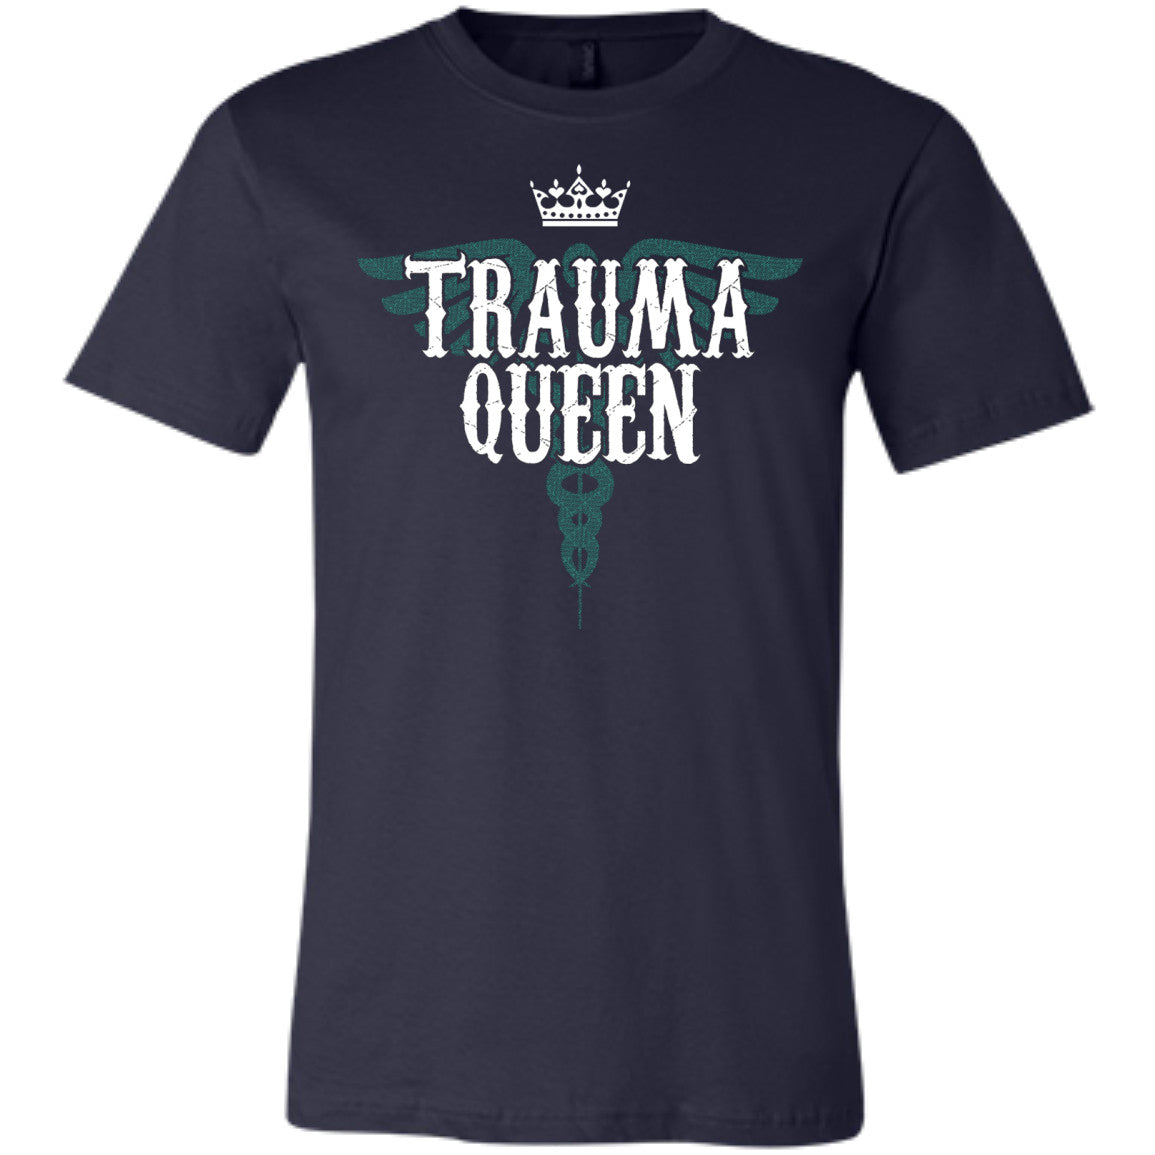 Trauma Queen Nurse Medic Shirts and Tanks - GoneBold.gift